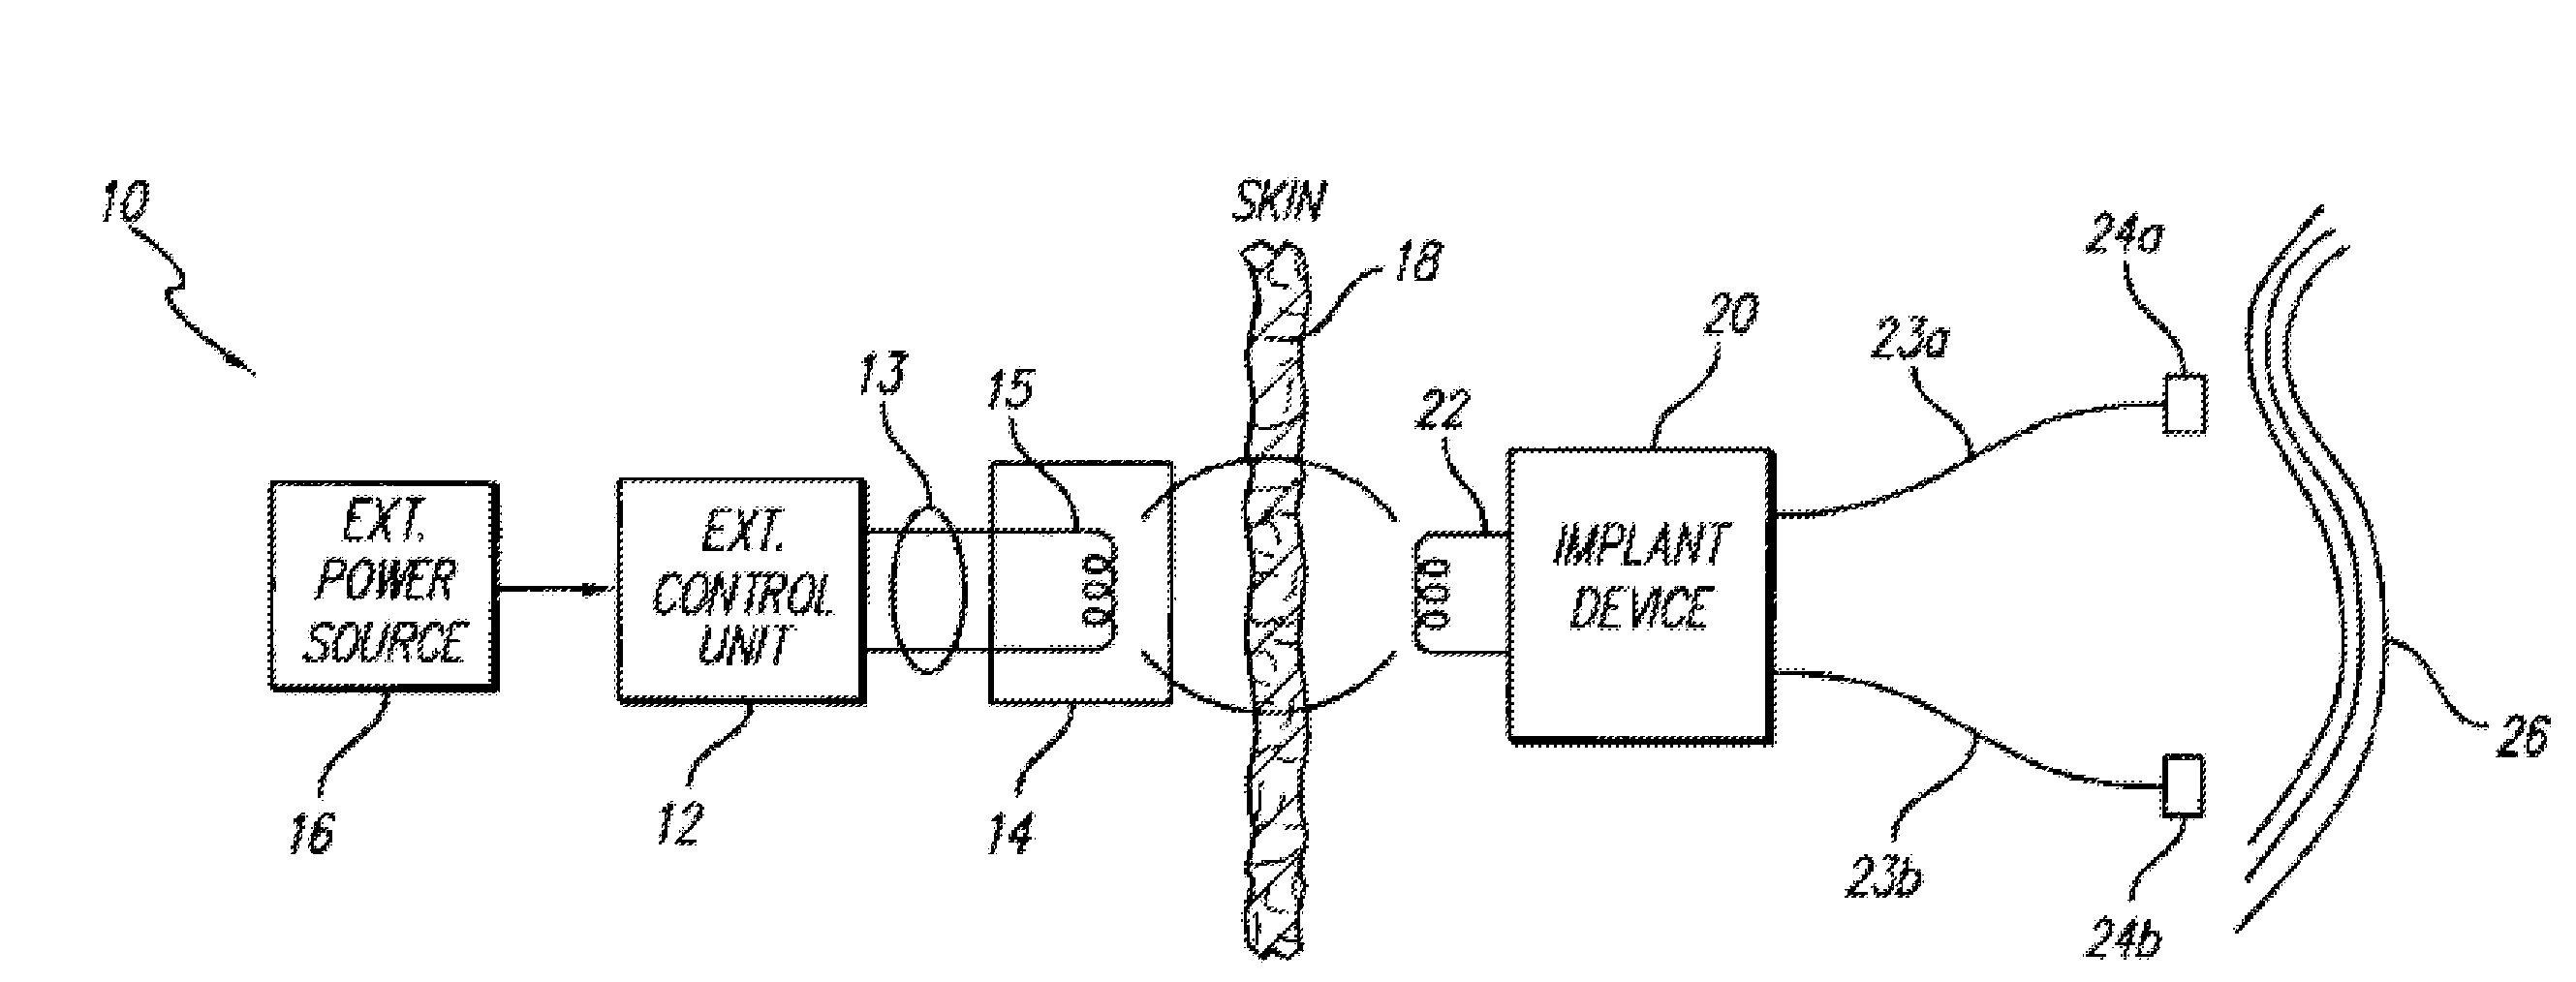 Implantable Medical Device with Single Coil for Charging and Communicating